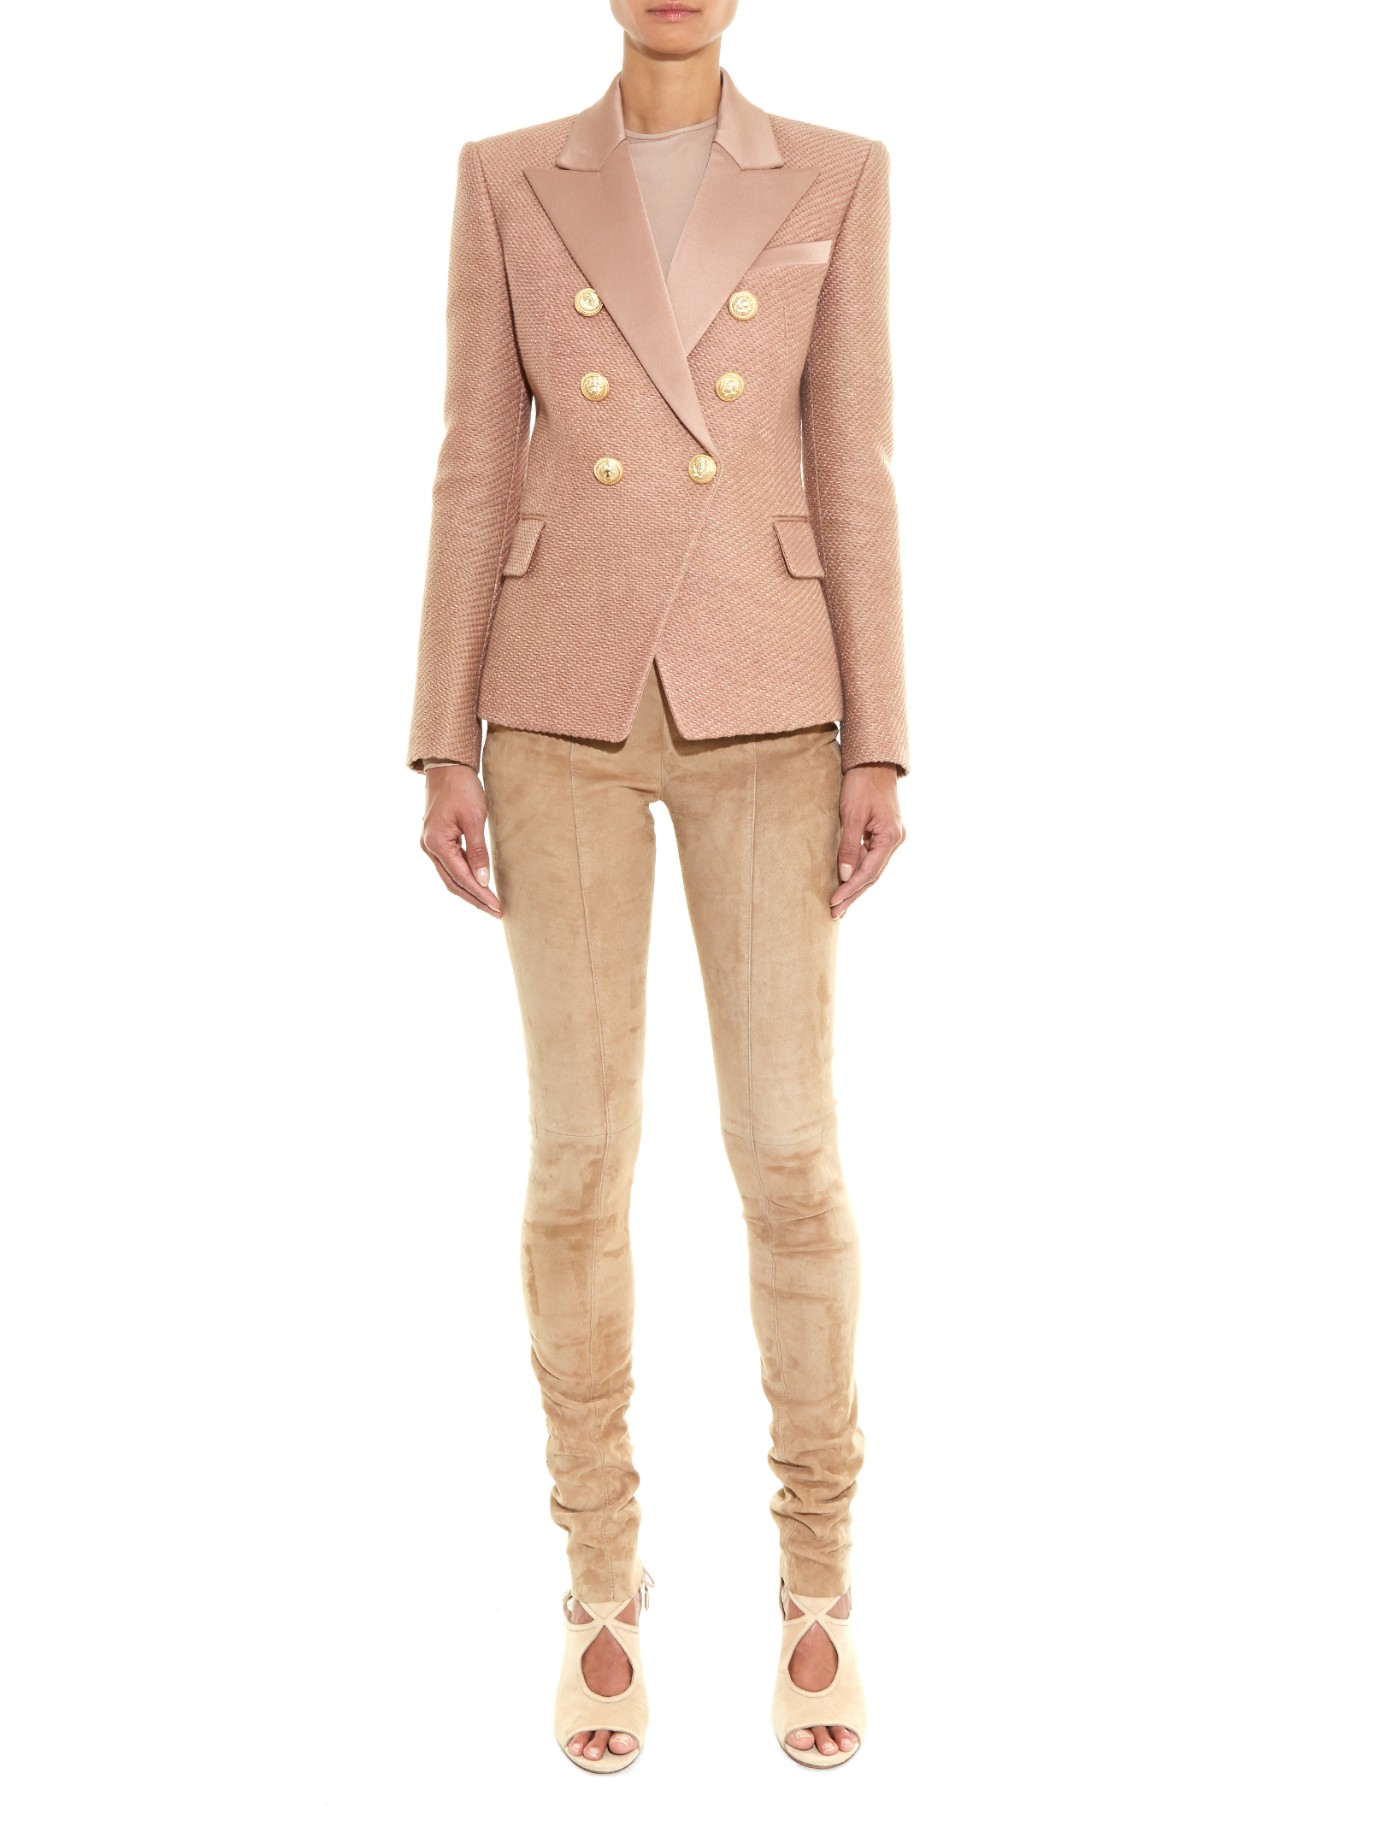 Balmain Double-Breasted Tailored Cotton Jacket in Natural | Lyst